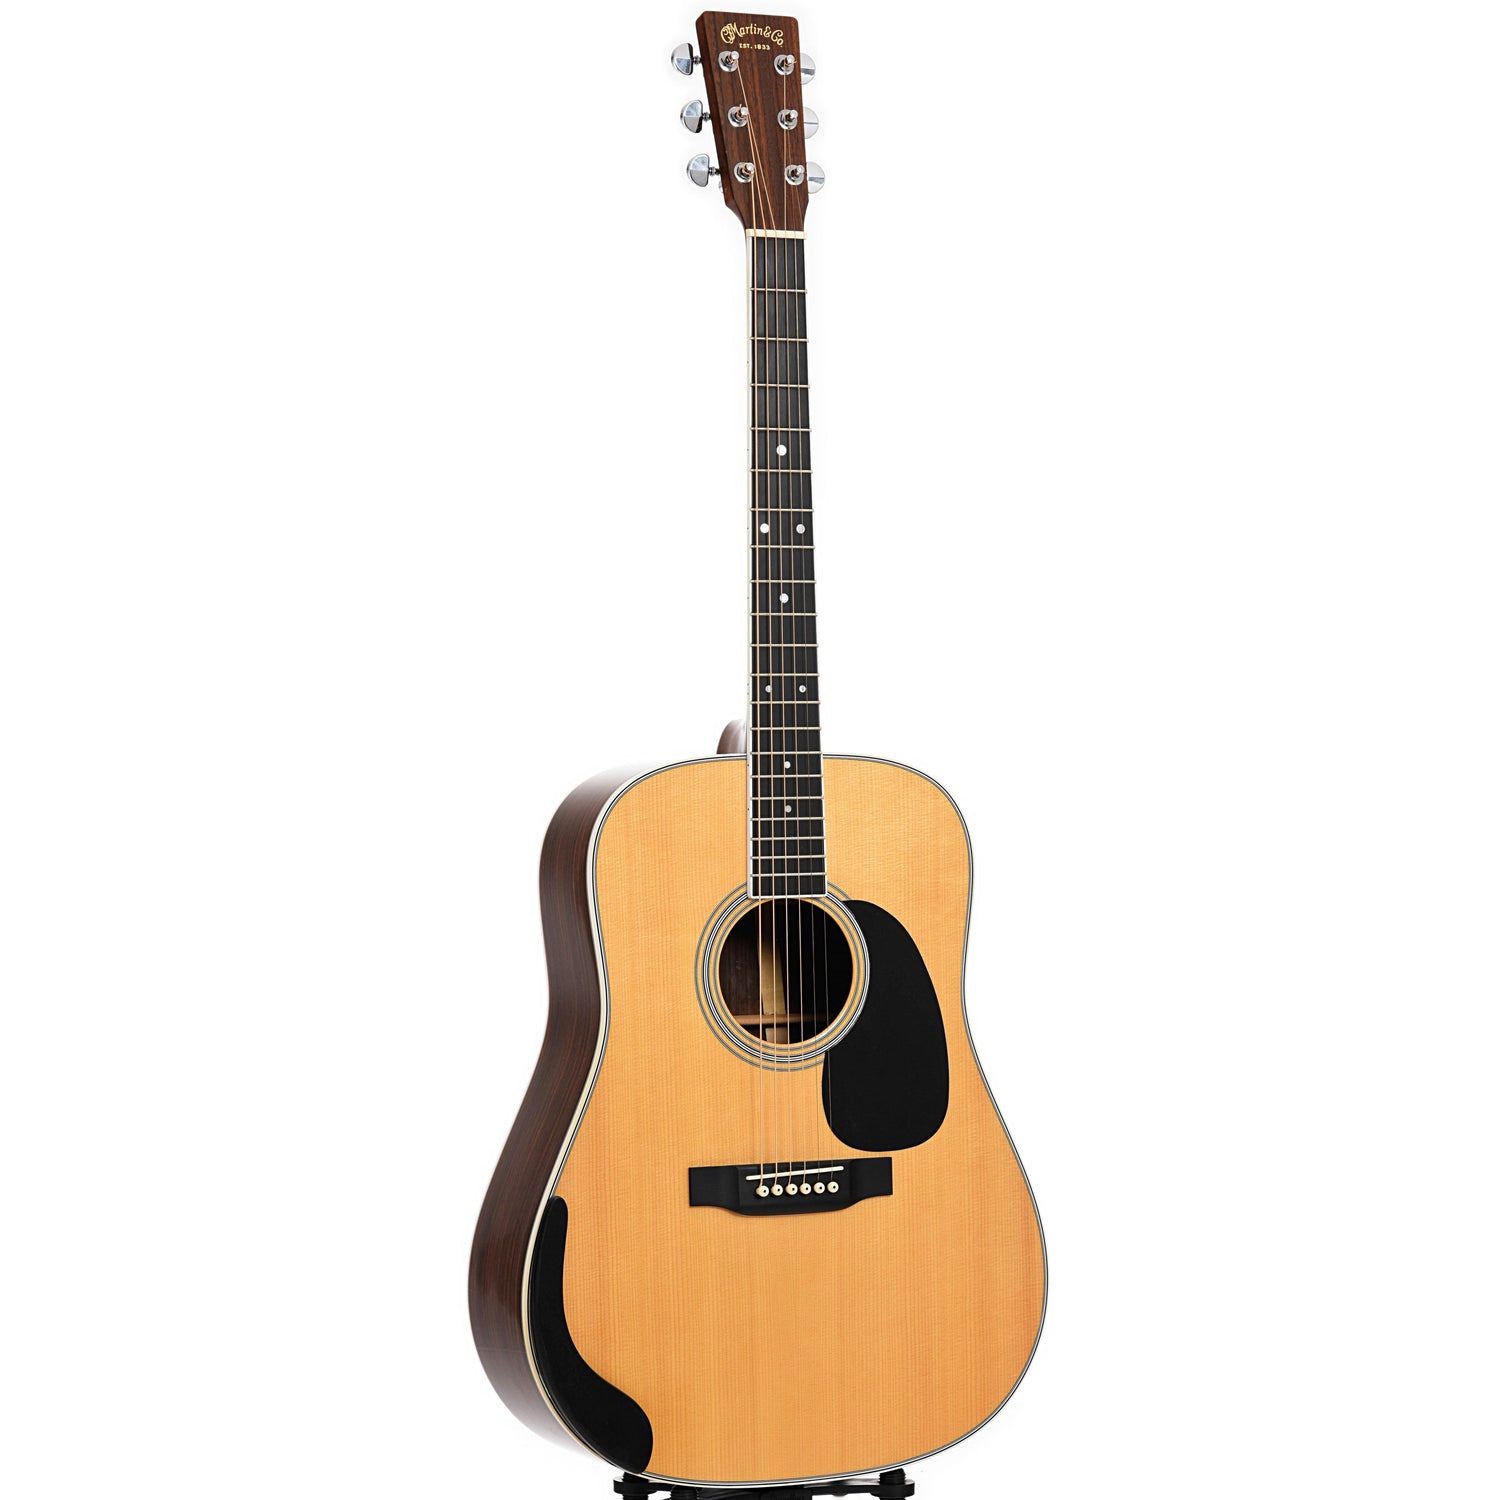 Full front and side of Martin D-35 Centennial Acoustic